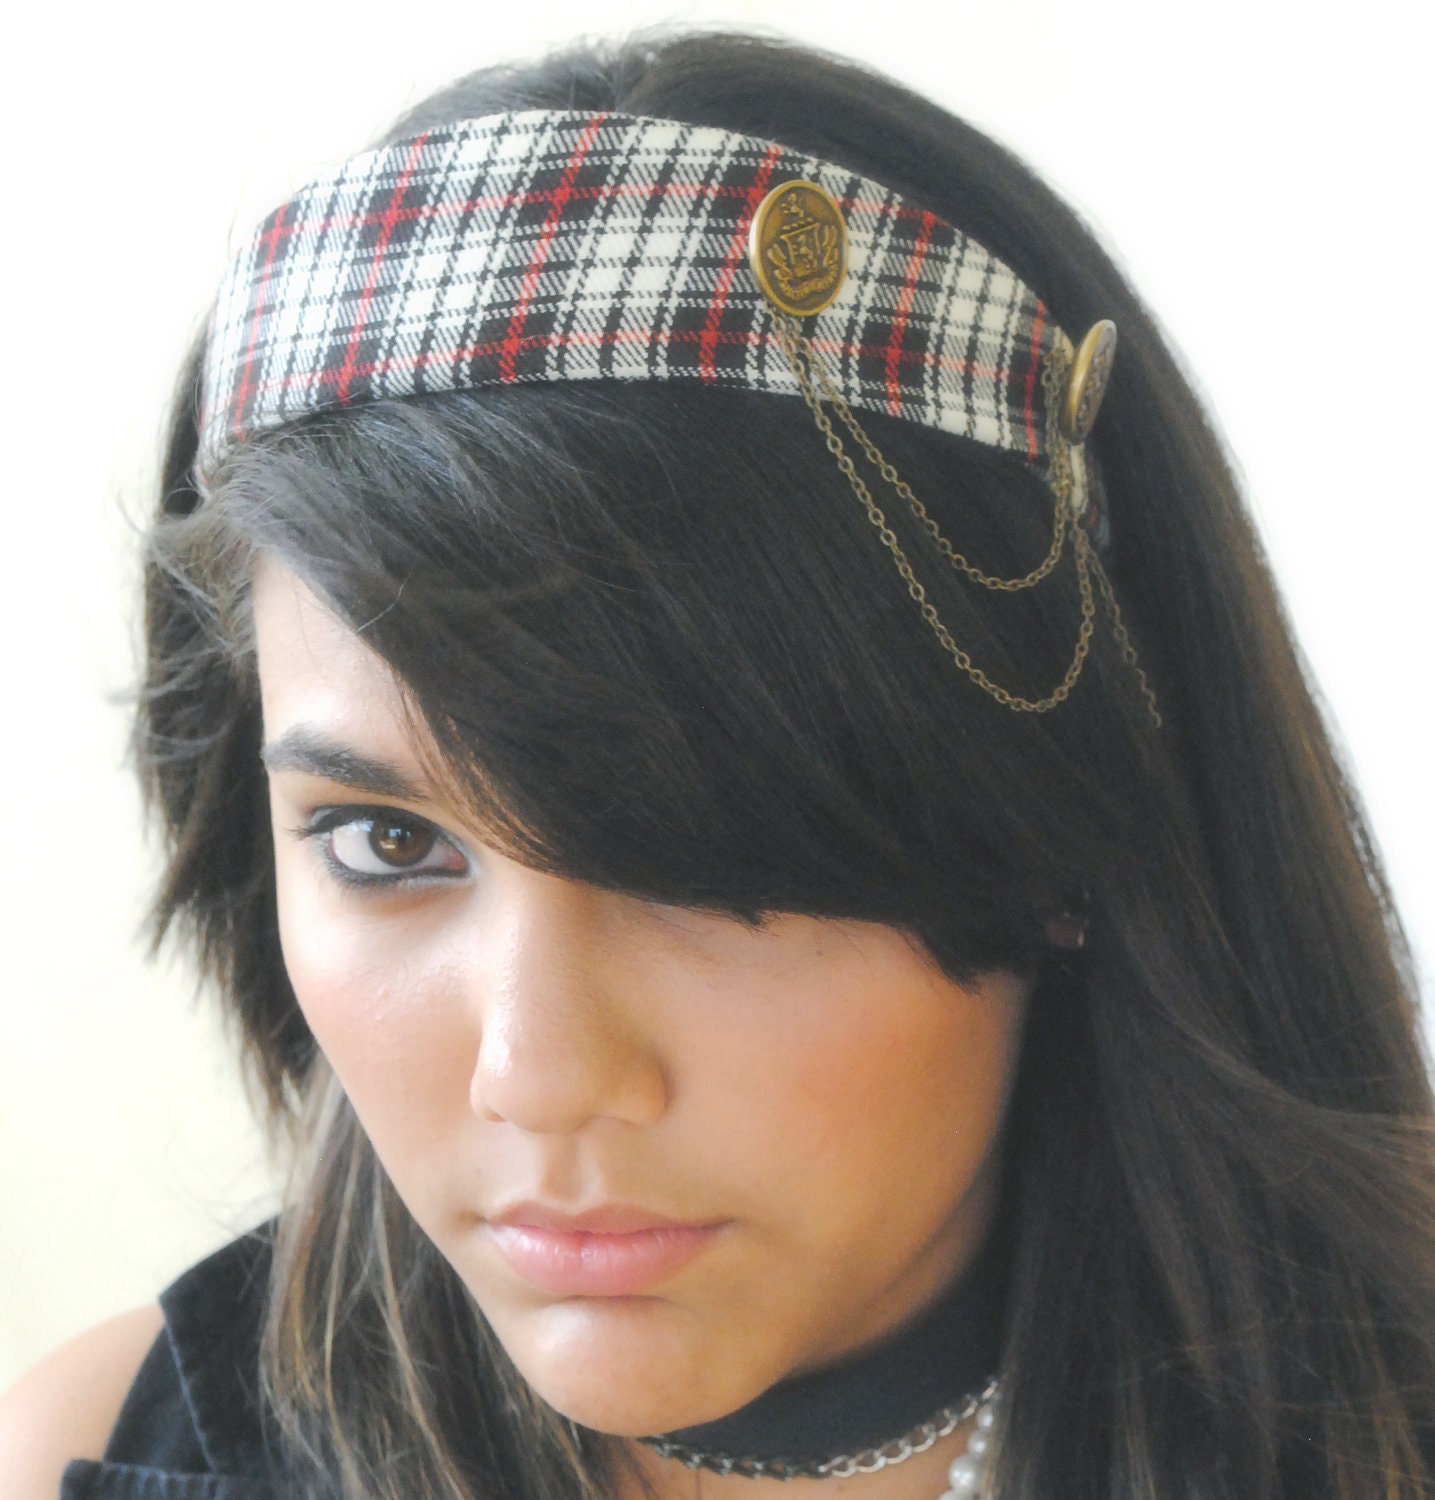 Headband Plaid Military Vintage Inspired Red Black White Vintage Button Antique Chain - by Sophia Touassa Millinery & Accessories